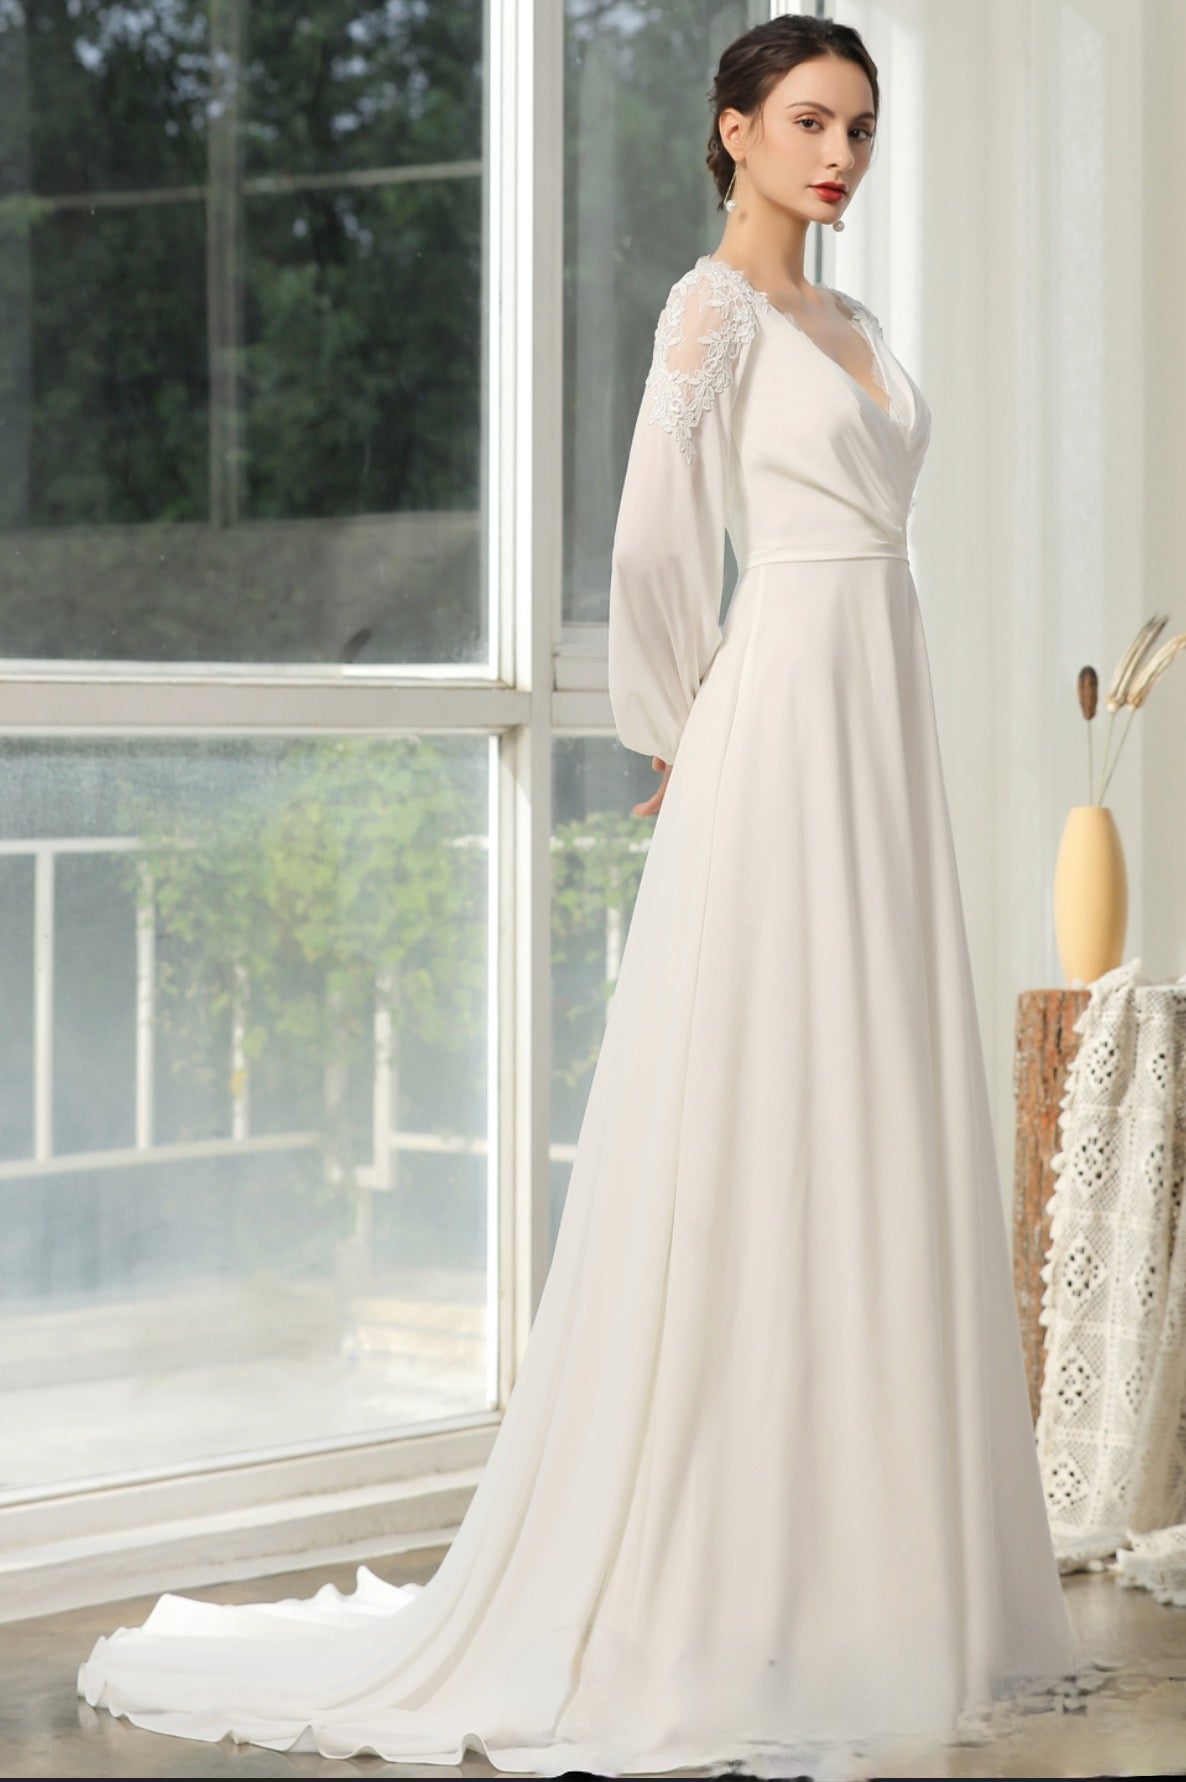 Simple Wedding Dress With Crossed Neckline And Lace Back – TulleLux ...